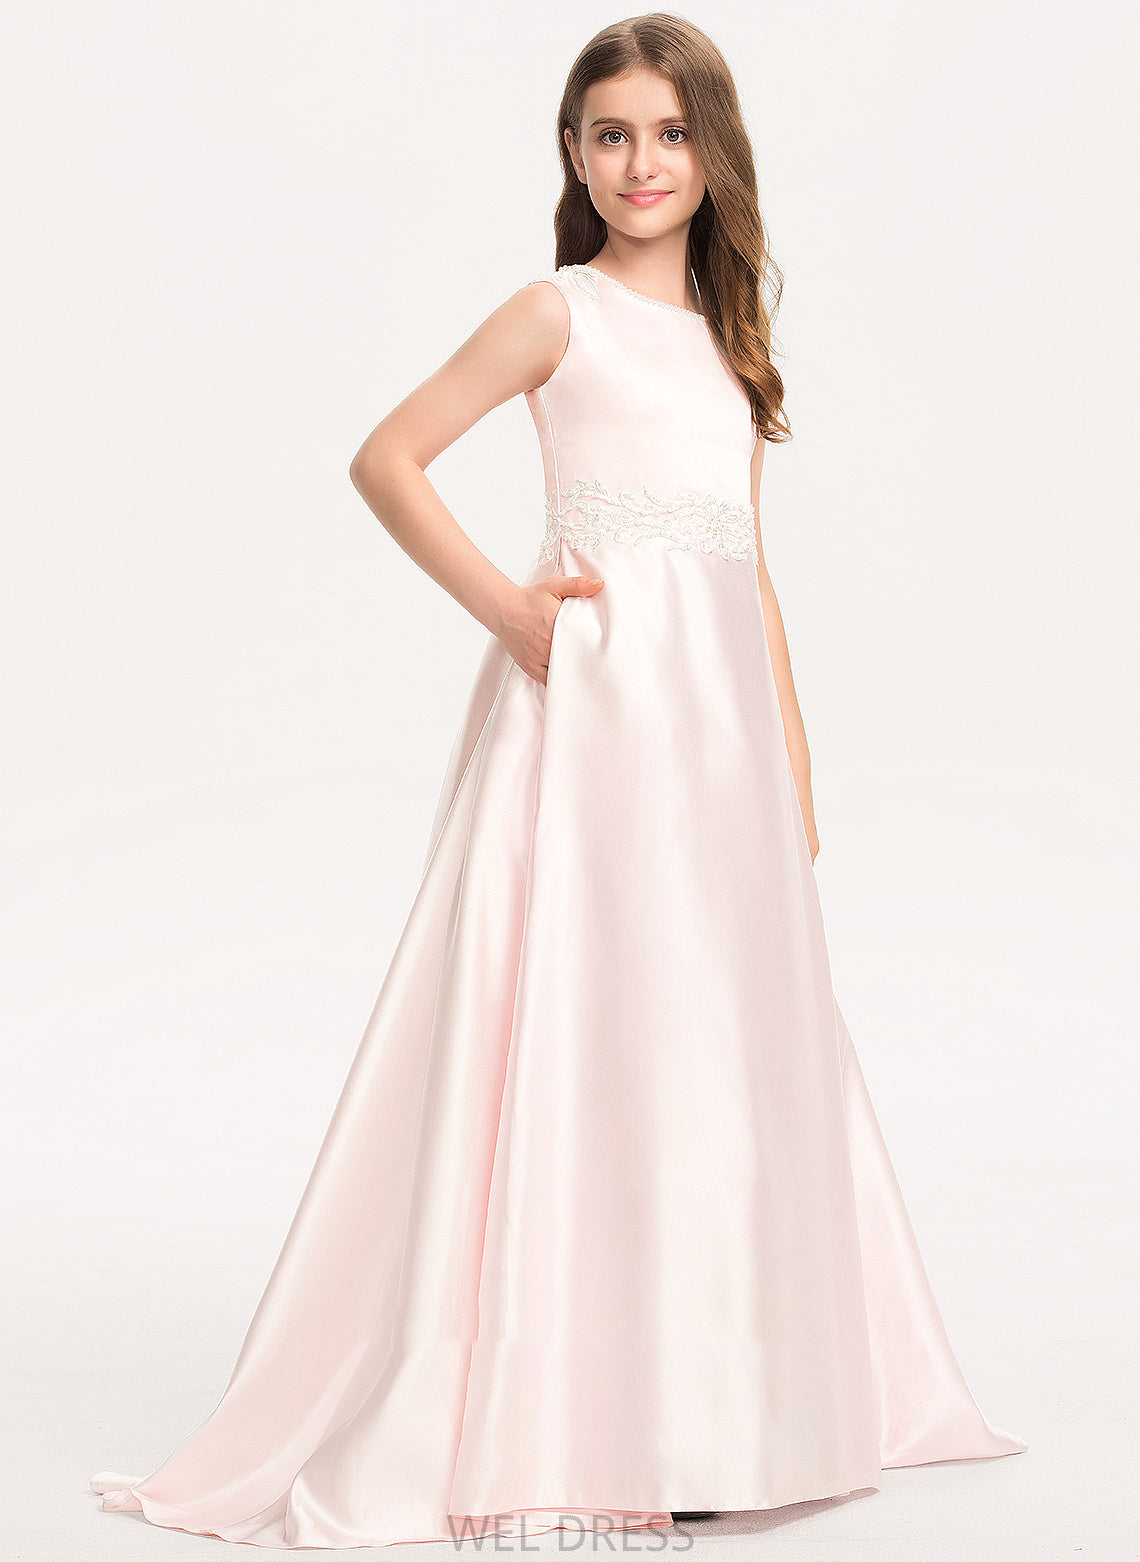 Train Bow(s) Scoop Sweep Junior Bridesmaid Dresses Heidy Neck Pockets Satin Lace A-Line With